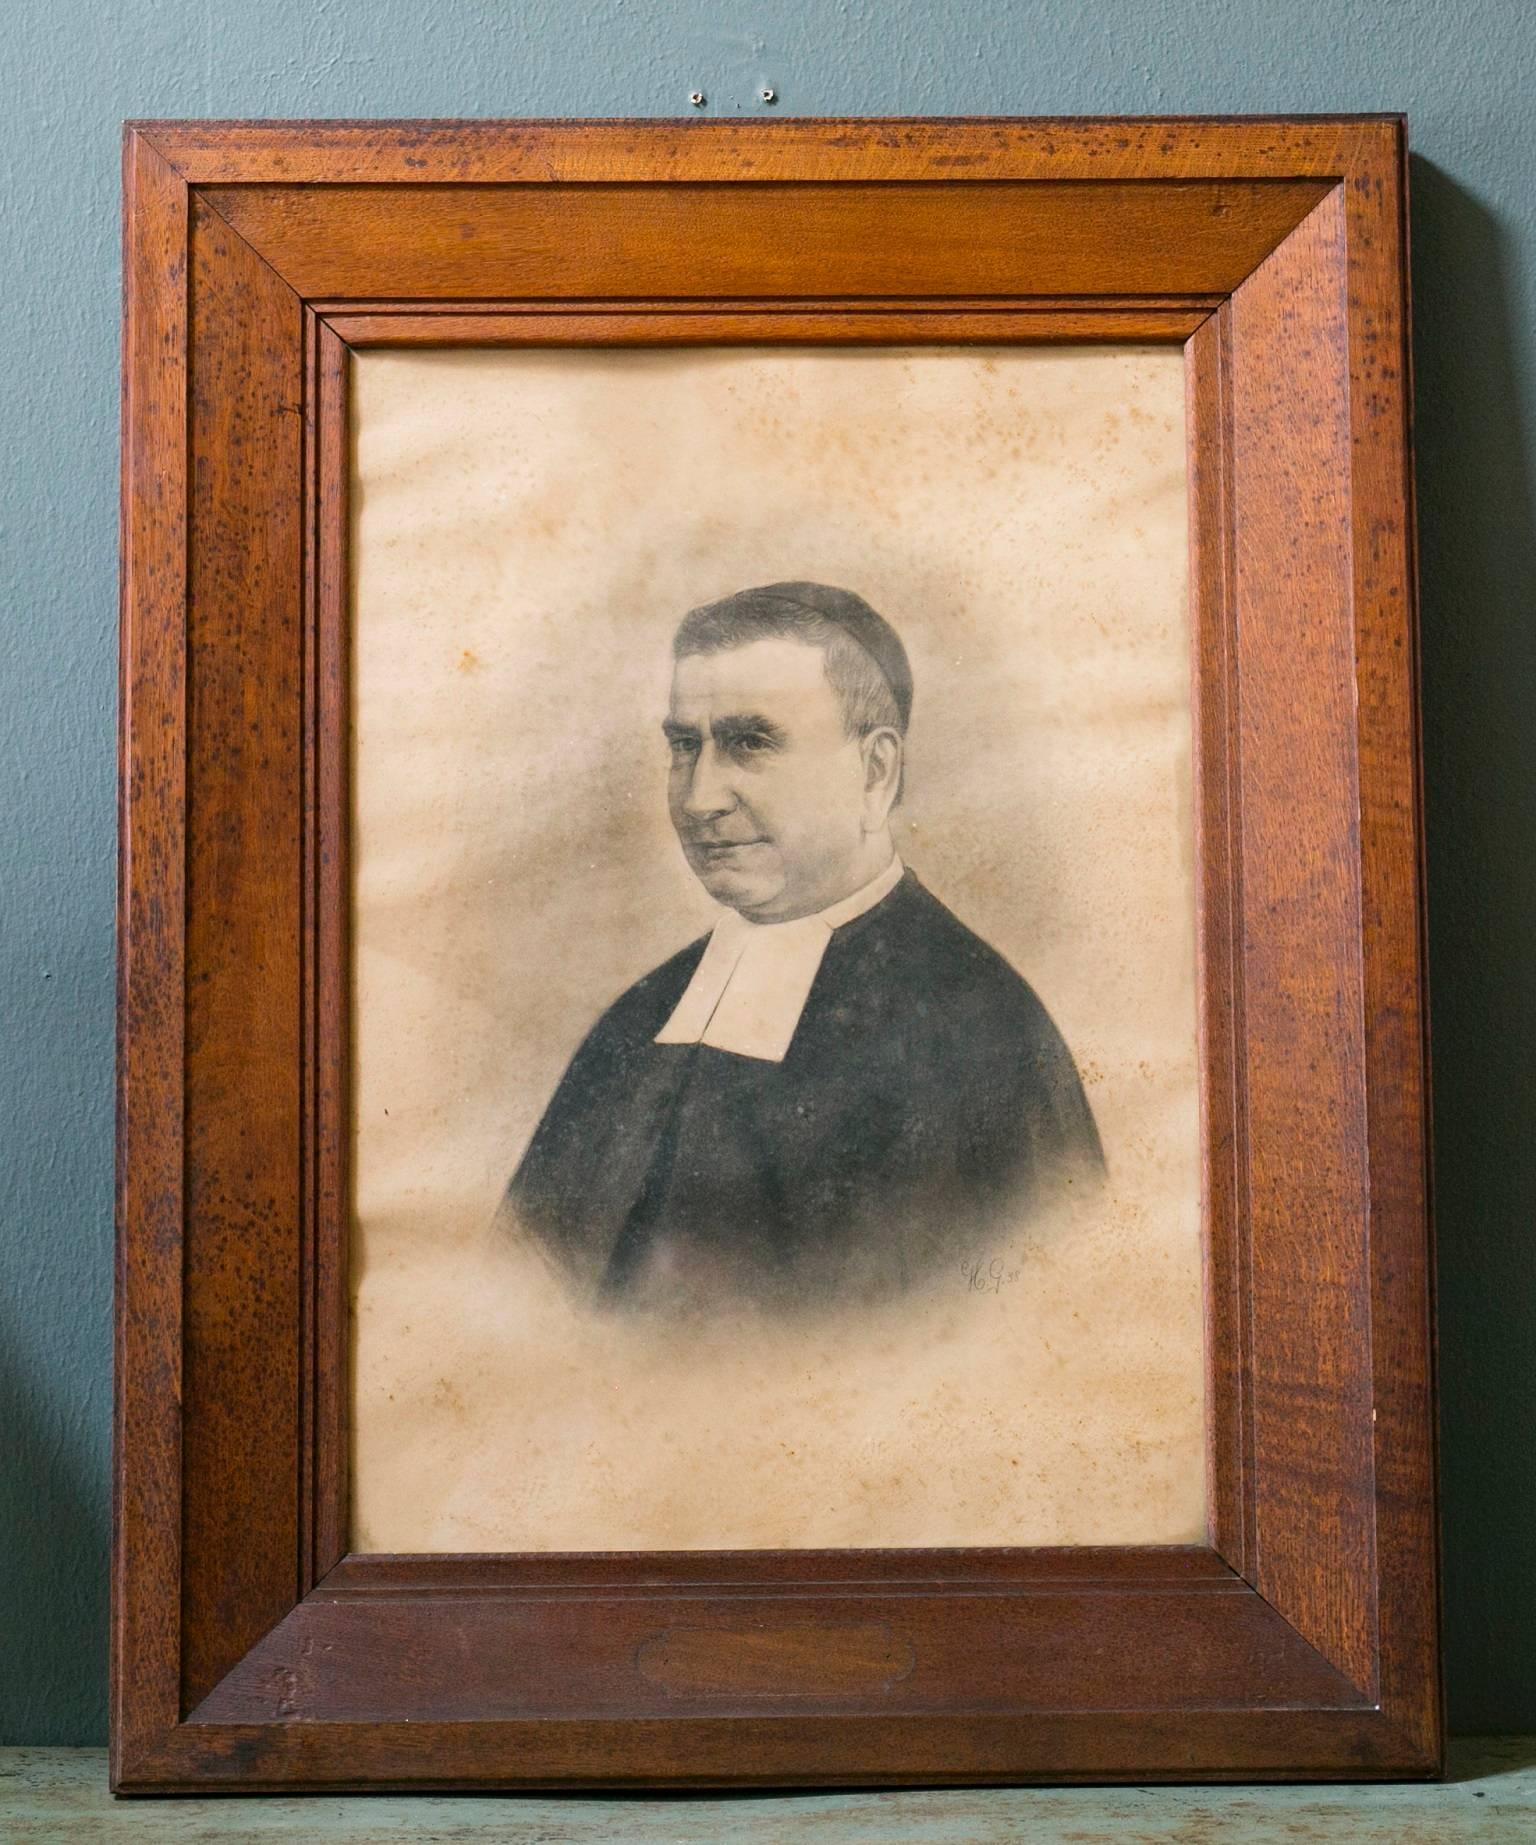 Framed graphite portraits on paper behind glass in heavy, solid oak frames. Two of the frames have the original Flemish plaques with the name of the sitter and period of time in office. Antique oak frames are beautiful quality. Perfect for a